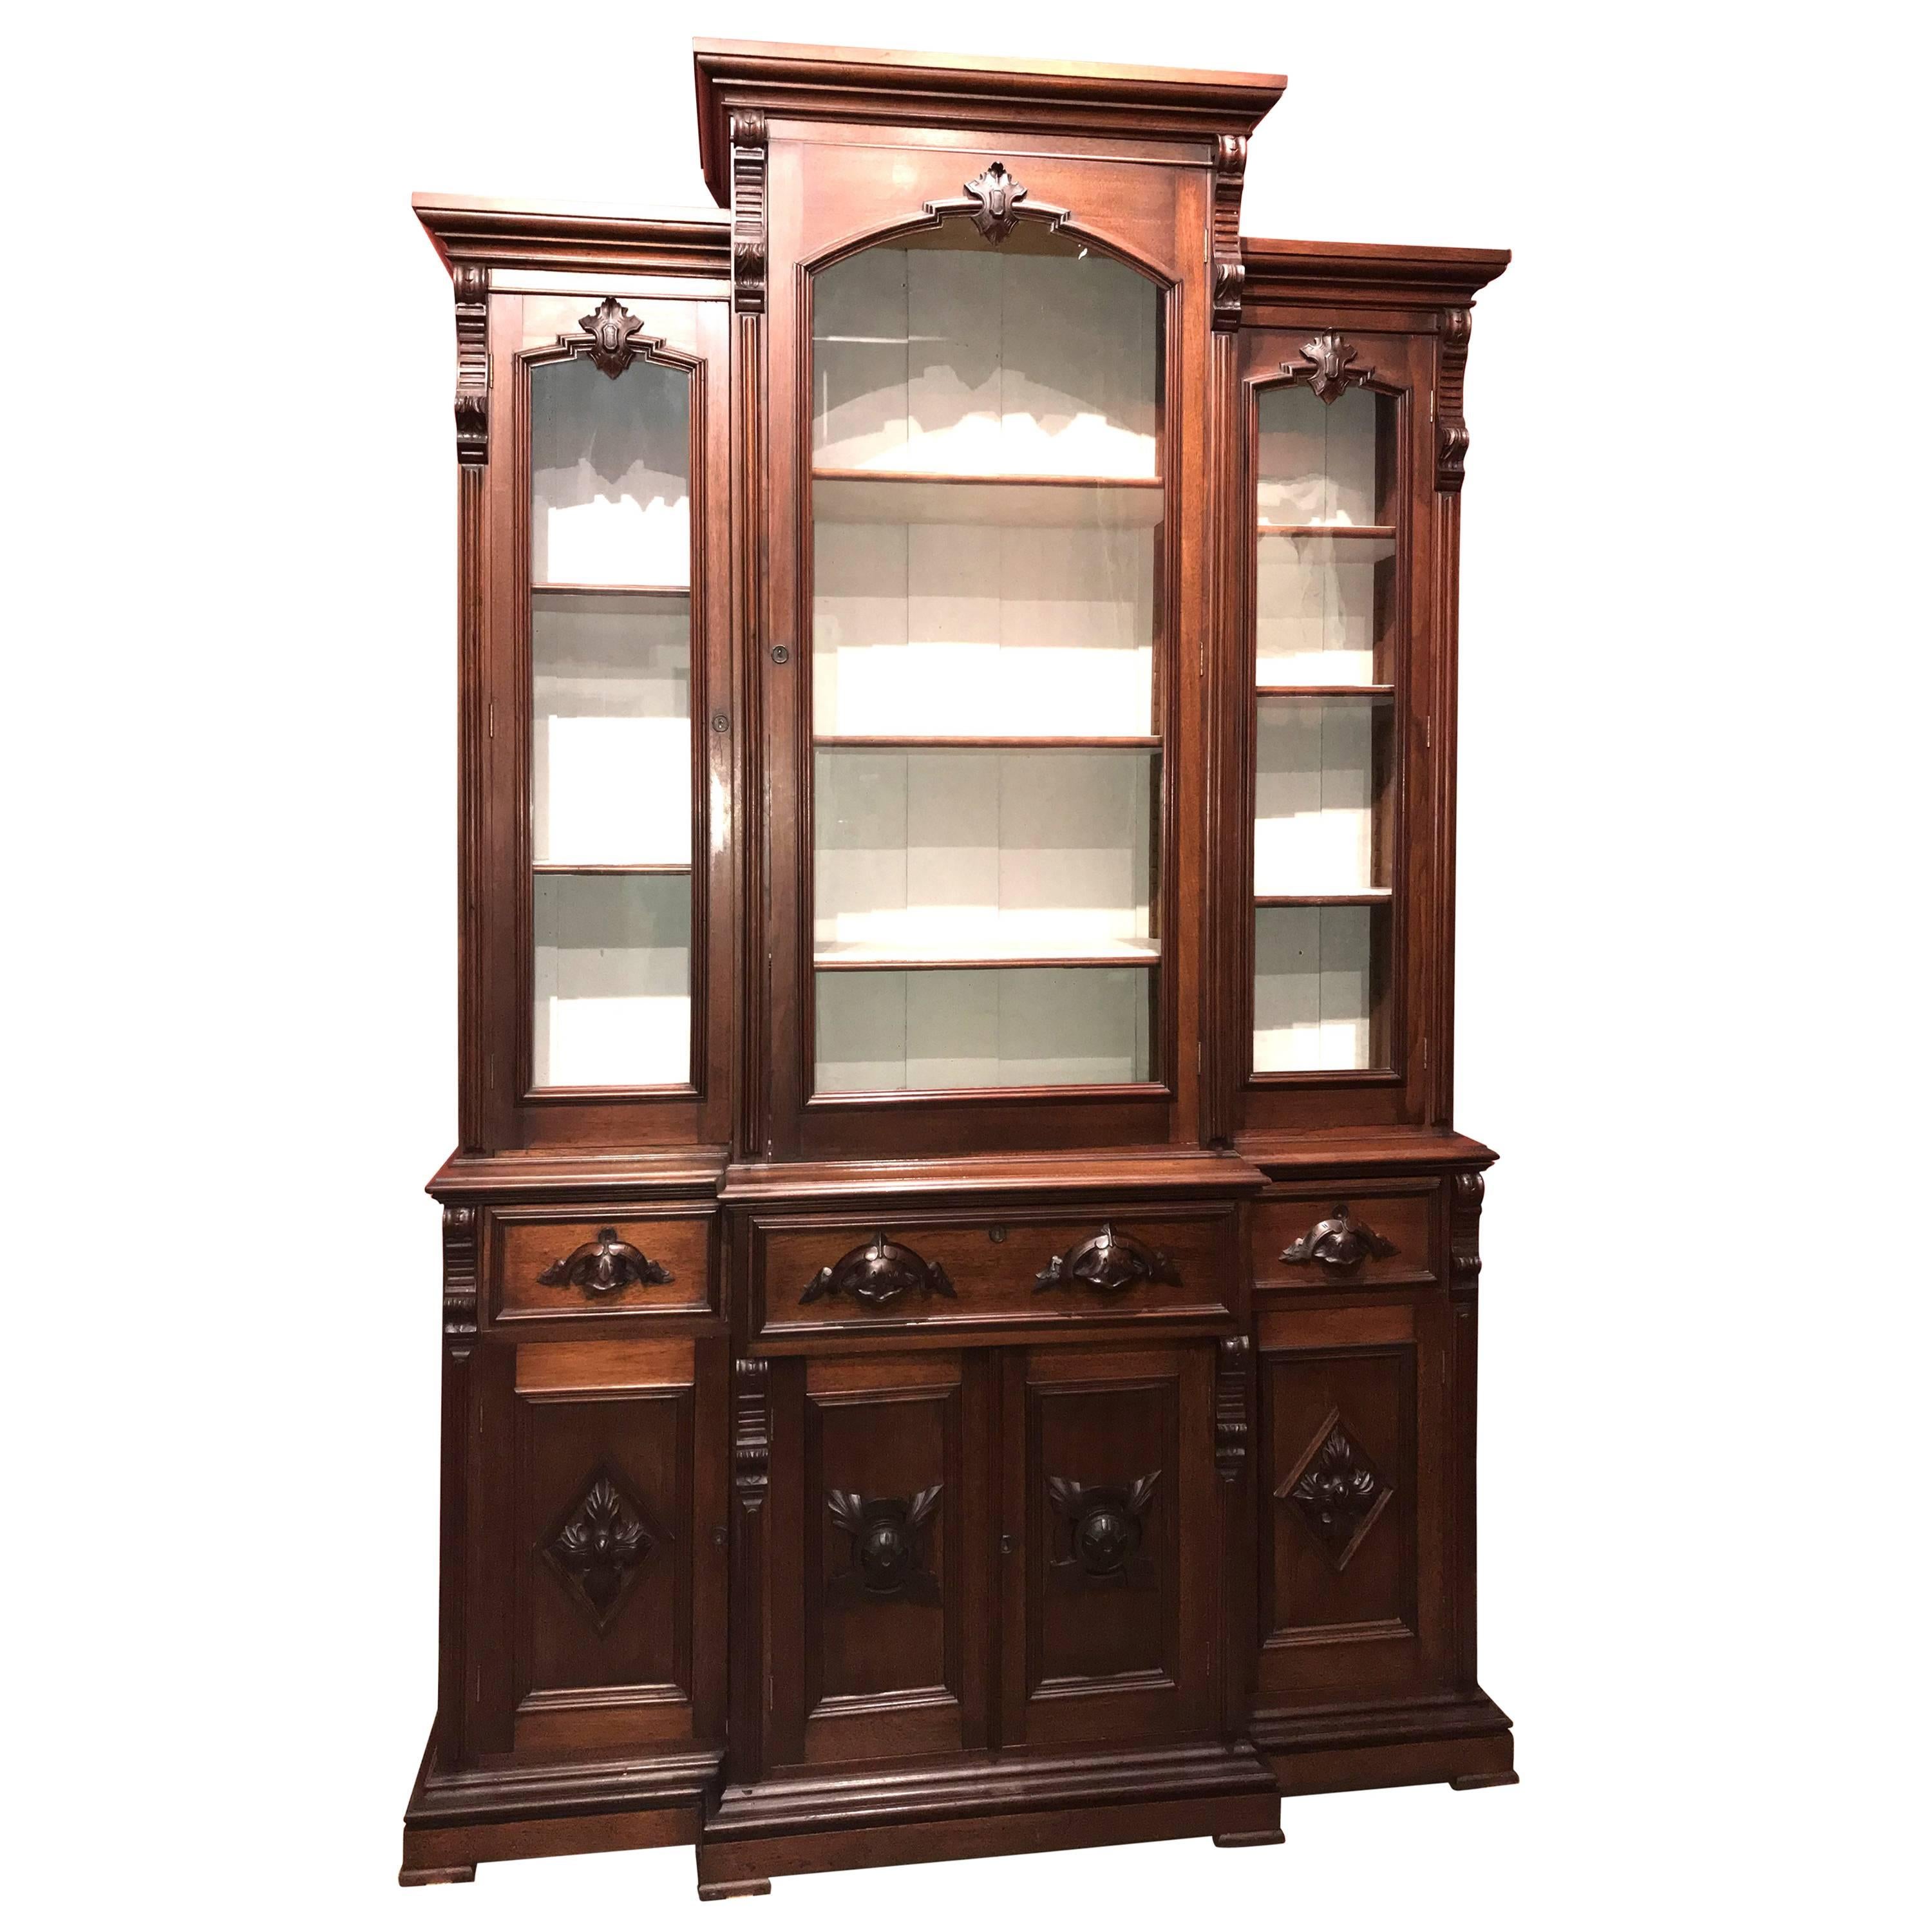 Renaissance Revival Victorian Glazed and Carved Walnut Cabinet or Bookcase